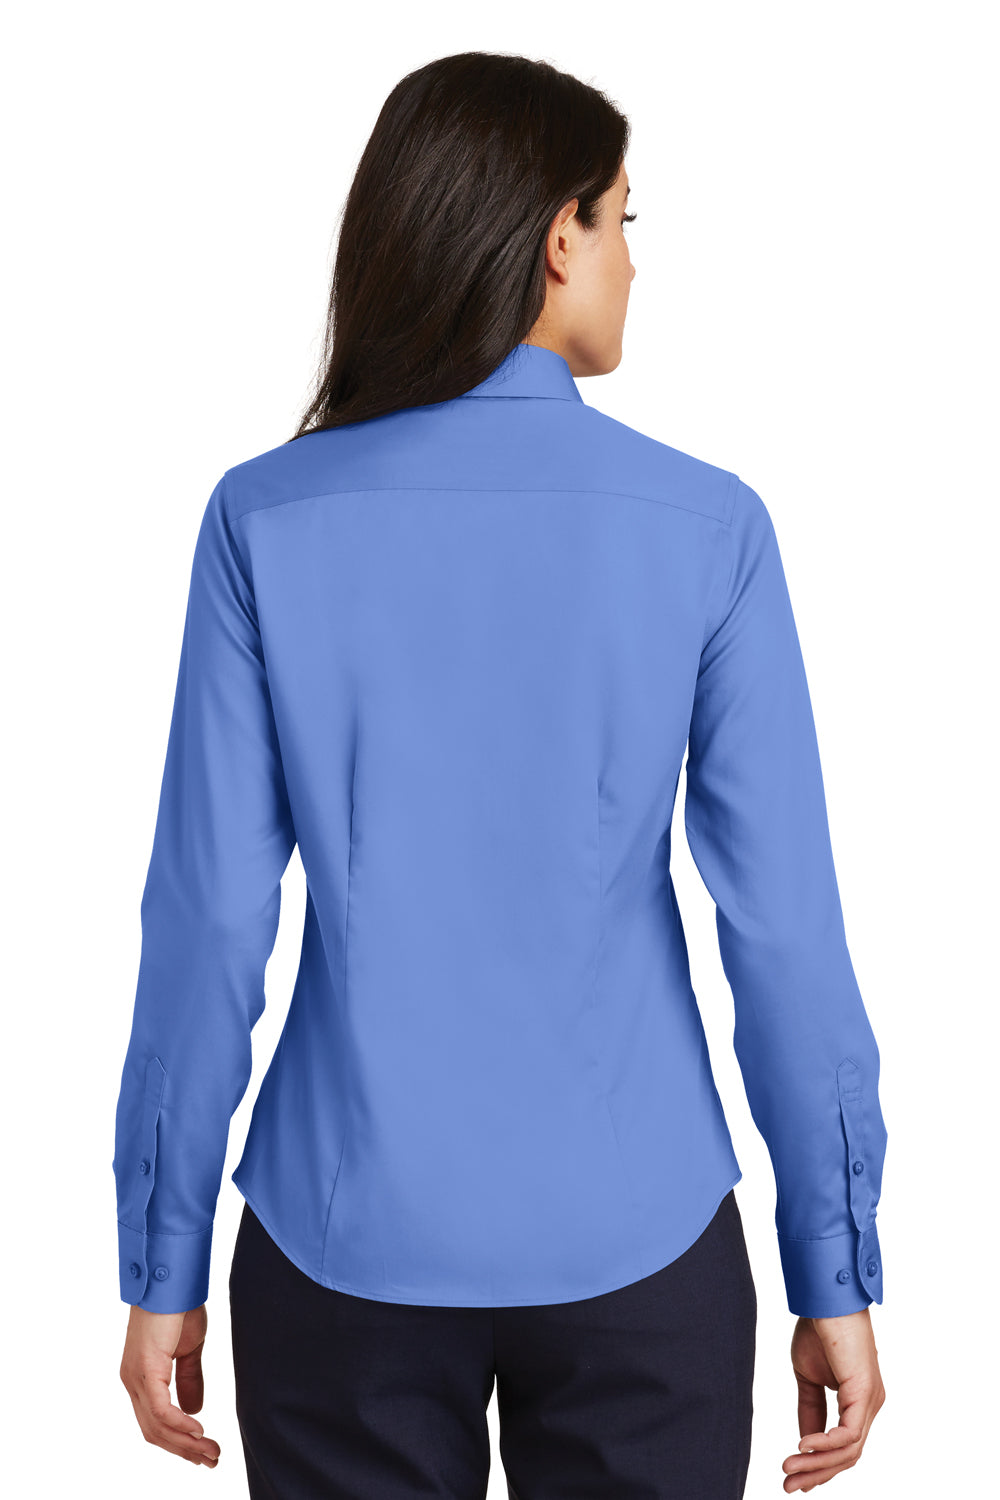 Port Authority L638 Womens Wrinkle Resistant Long Sleeve Button Down Shirt Ultramarine Blue Back